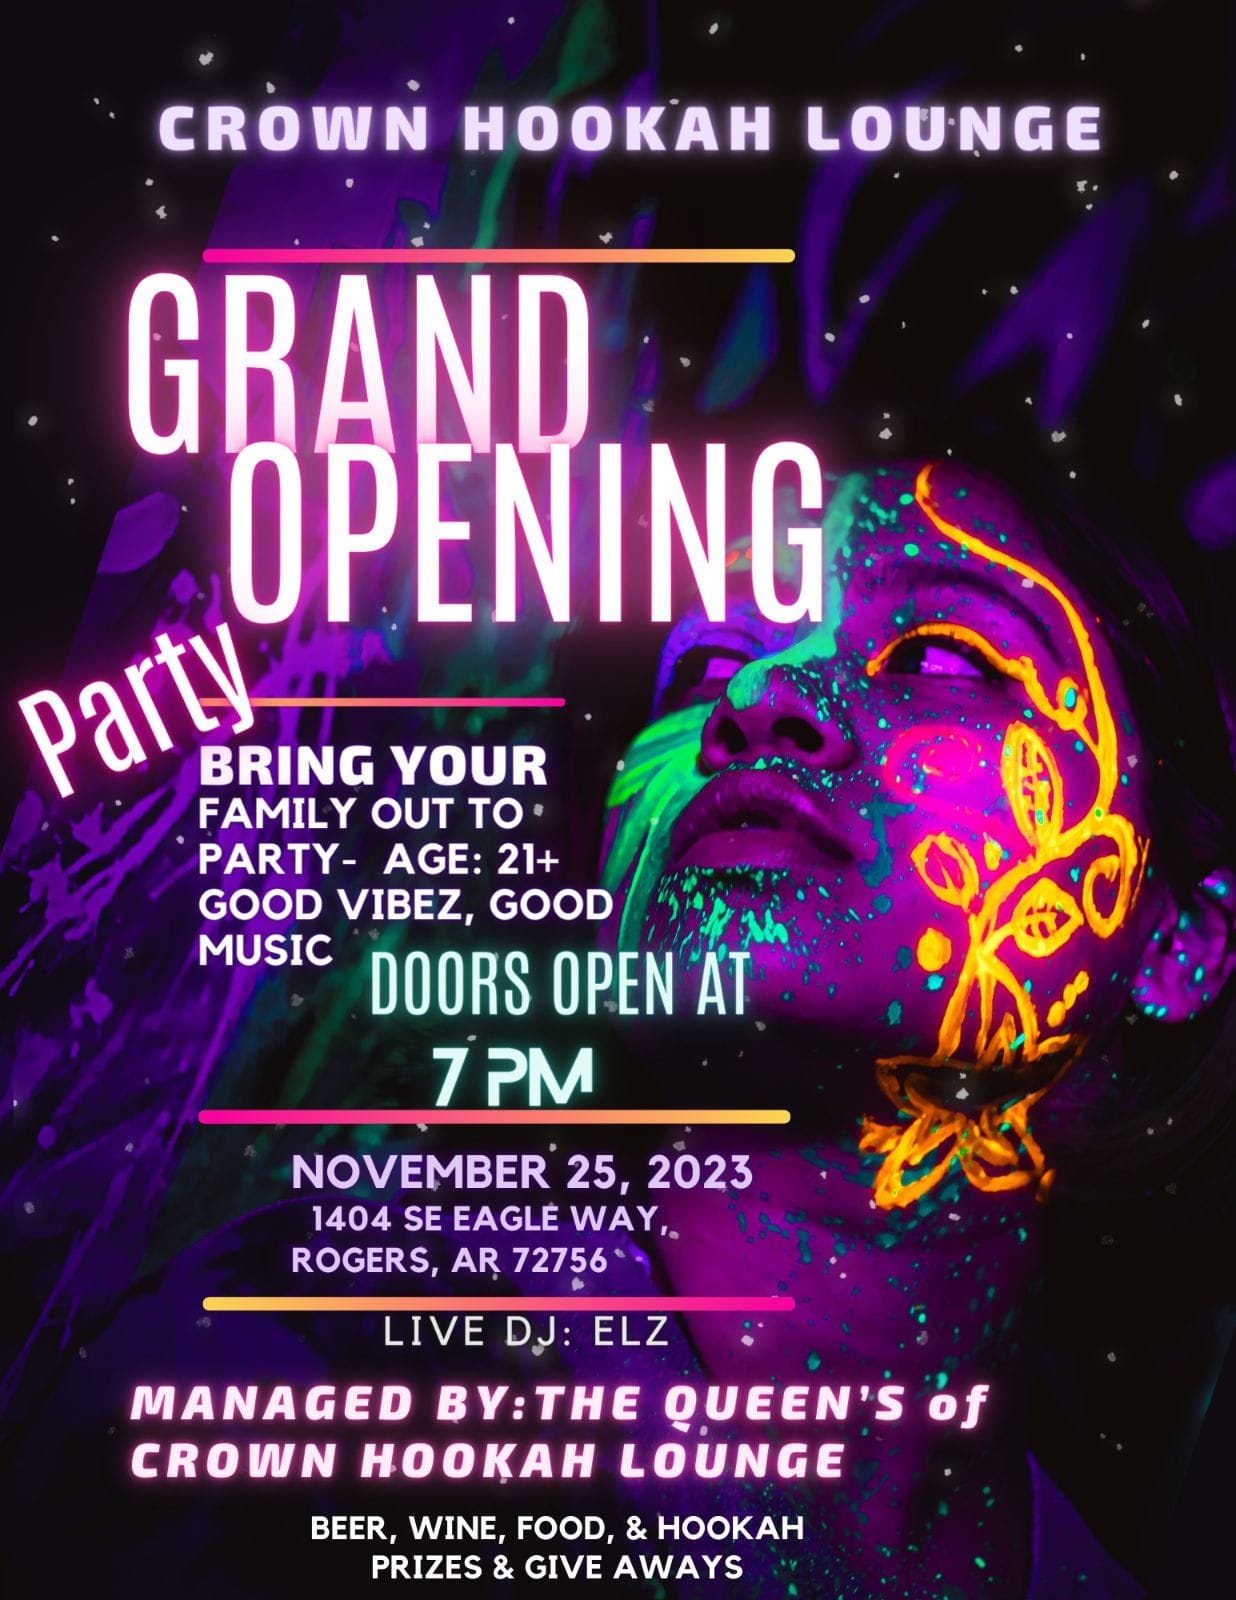 May be an image of 1 person, hookah and text that says 'CROWN HOOKAH LOUNGE GRAND OPENING Party BRING YOUR FAMILY OUT TO PARTY- AGE: 21+ GOOD VIBEZ, GOOD MUSIC DOORS OPEN AT 7PM NOVEMBER 25, 2023 1404 SE EAGLE WAY,, ROGERS, AR 72756 L LIVE DJ: ELZ MANAGED BY:THE QUEEN'S of CROWN HOOKAH LOUNGE BEER, WINE, FOOD & HOOKAH PRIZES & GIVE AWAYS'